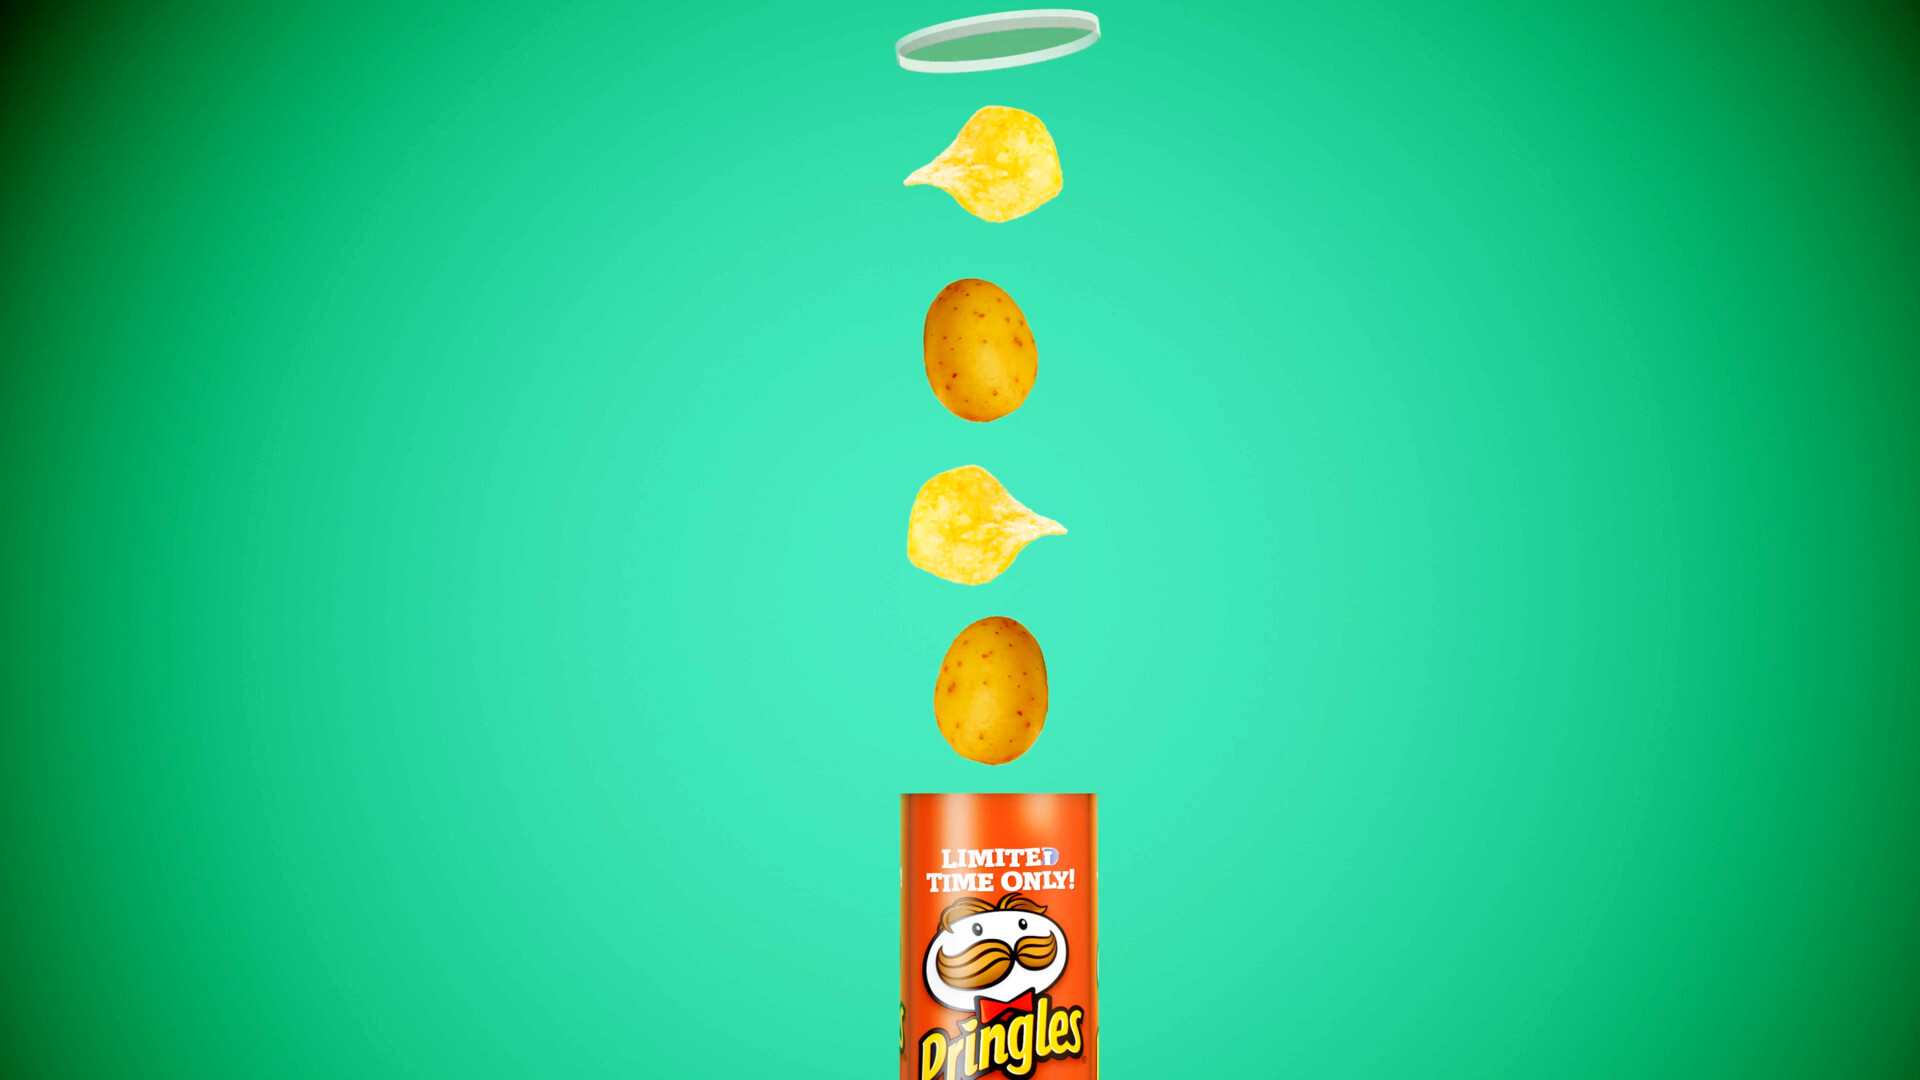 products, pringles